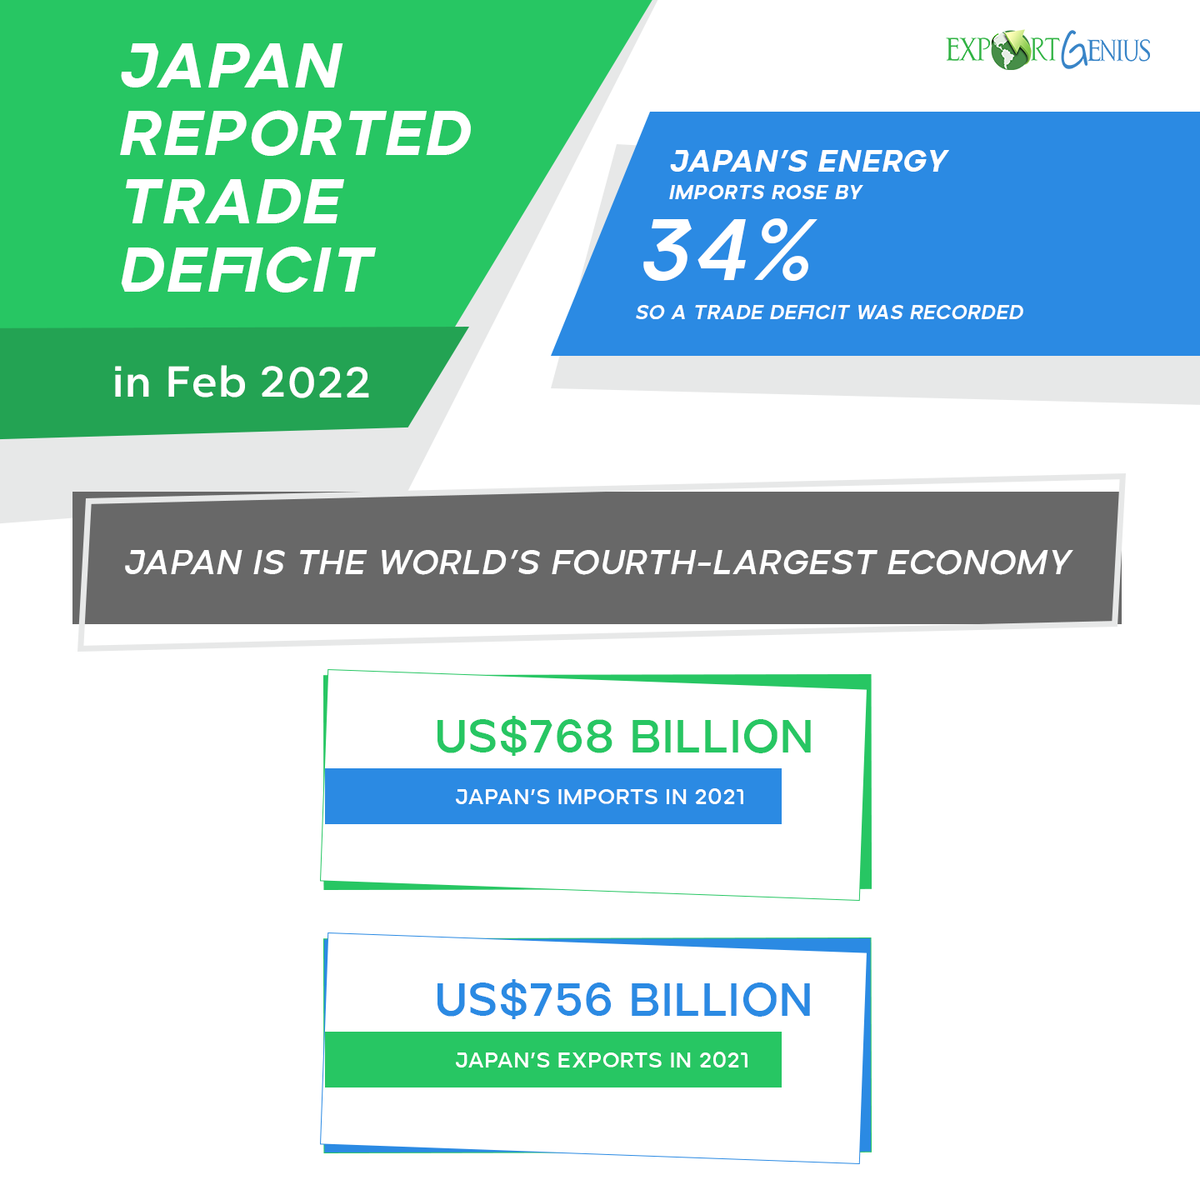 Japan recorded a trade deficit in Feb 2022 as energy imports rose by 34%. In 2021, Japan’s exports totaled US$756 billion, while imports totaled US$768 billion.

#Japan #TradeDeficit #energyimports #japanexports #imports #japantrade